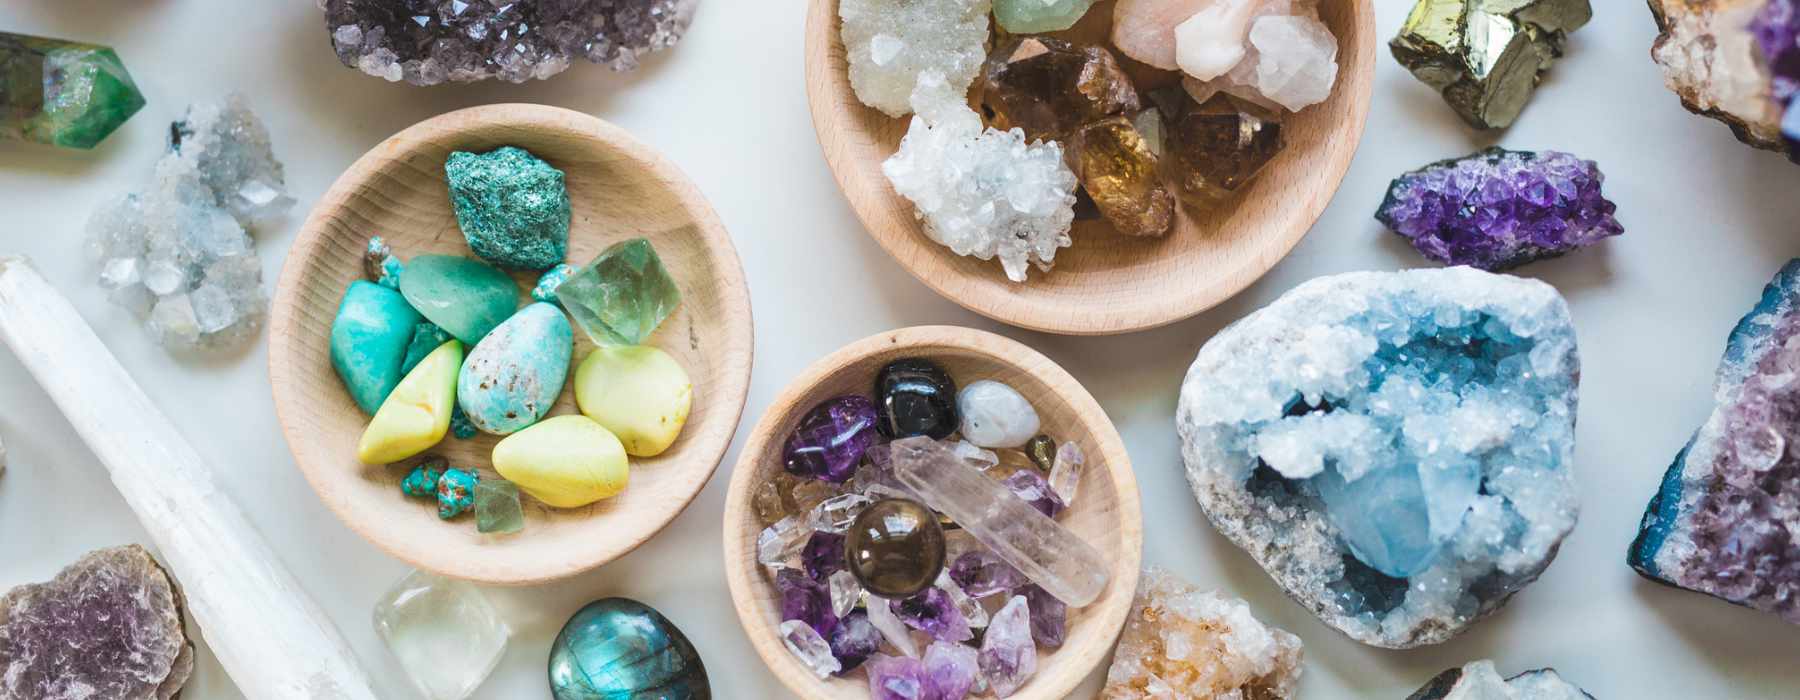 Stones that rock your world